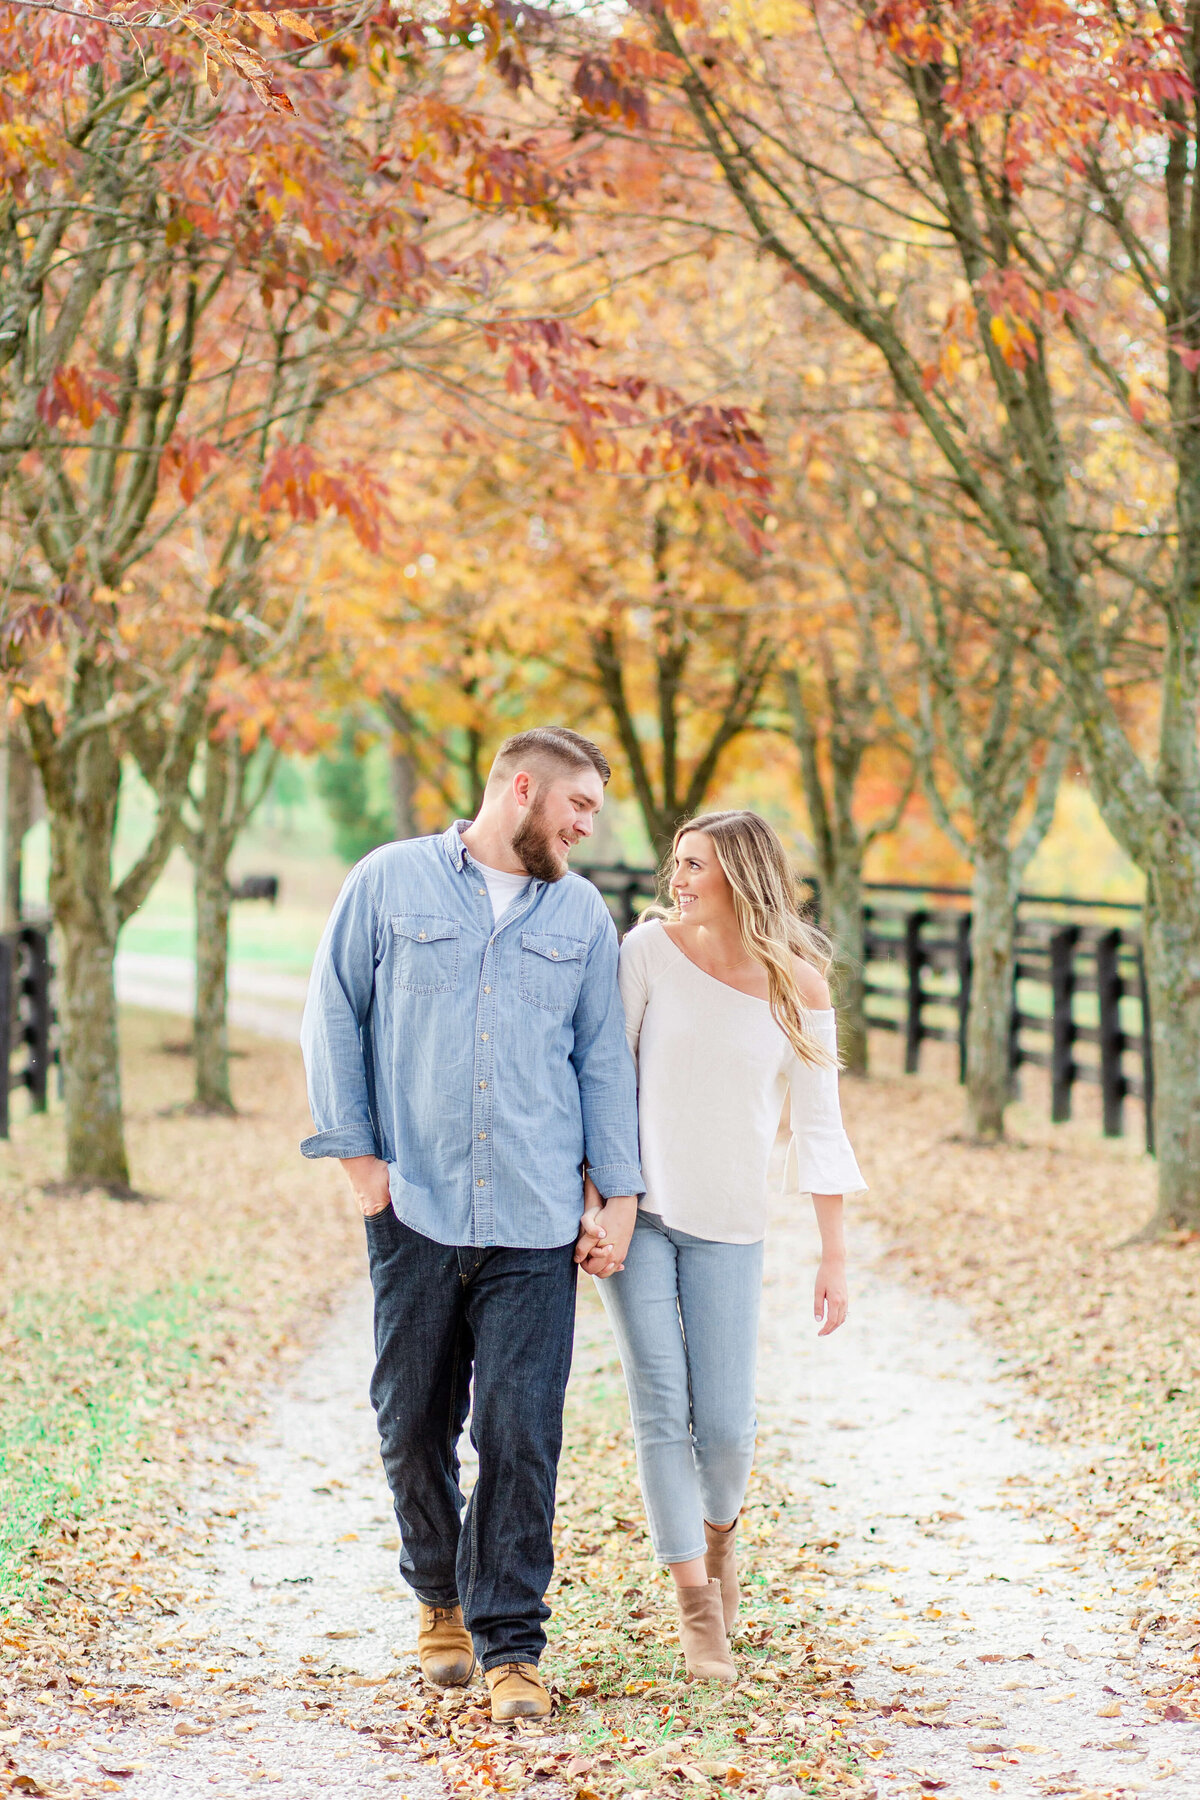 Engagement-photo-outfit-and-location-inspiration-in-Midwest-3